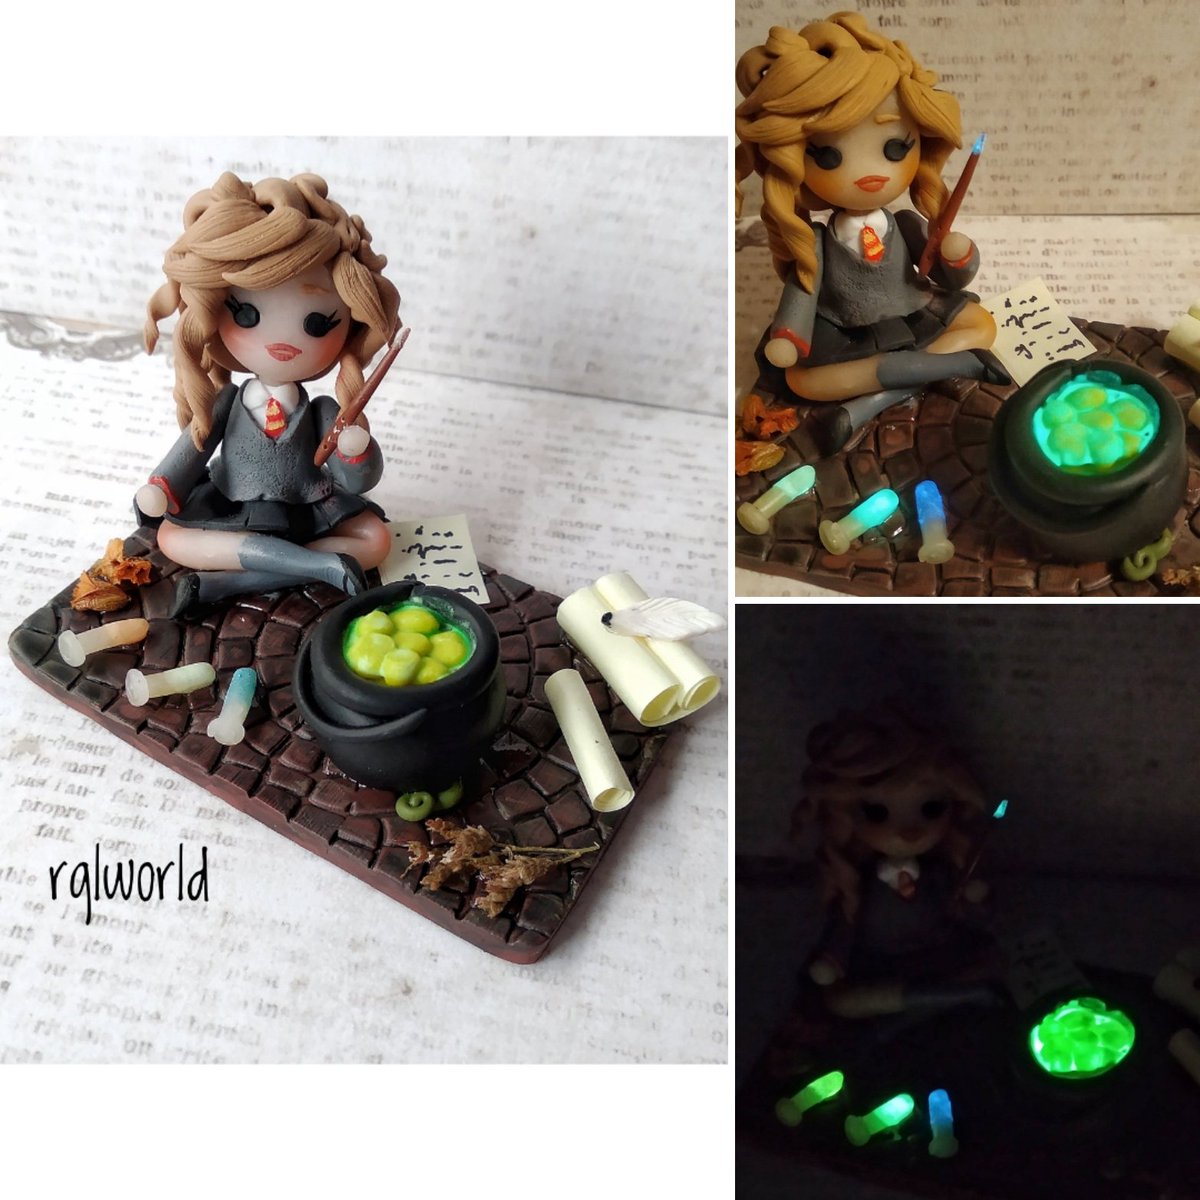 Good morning! Today I show a magic and special post. She glows in the dark. Look at all the details of her potion's materials.
#polimerclay #handmade #art